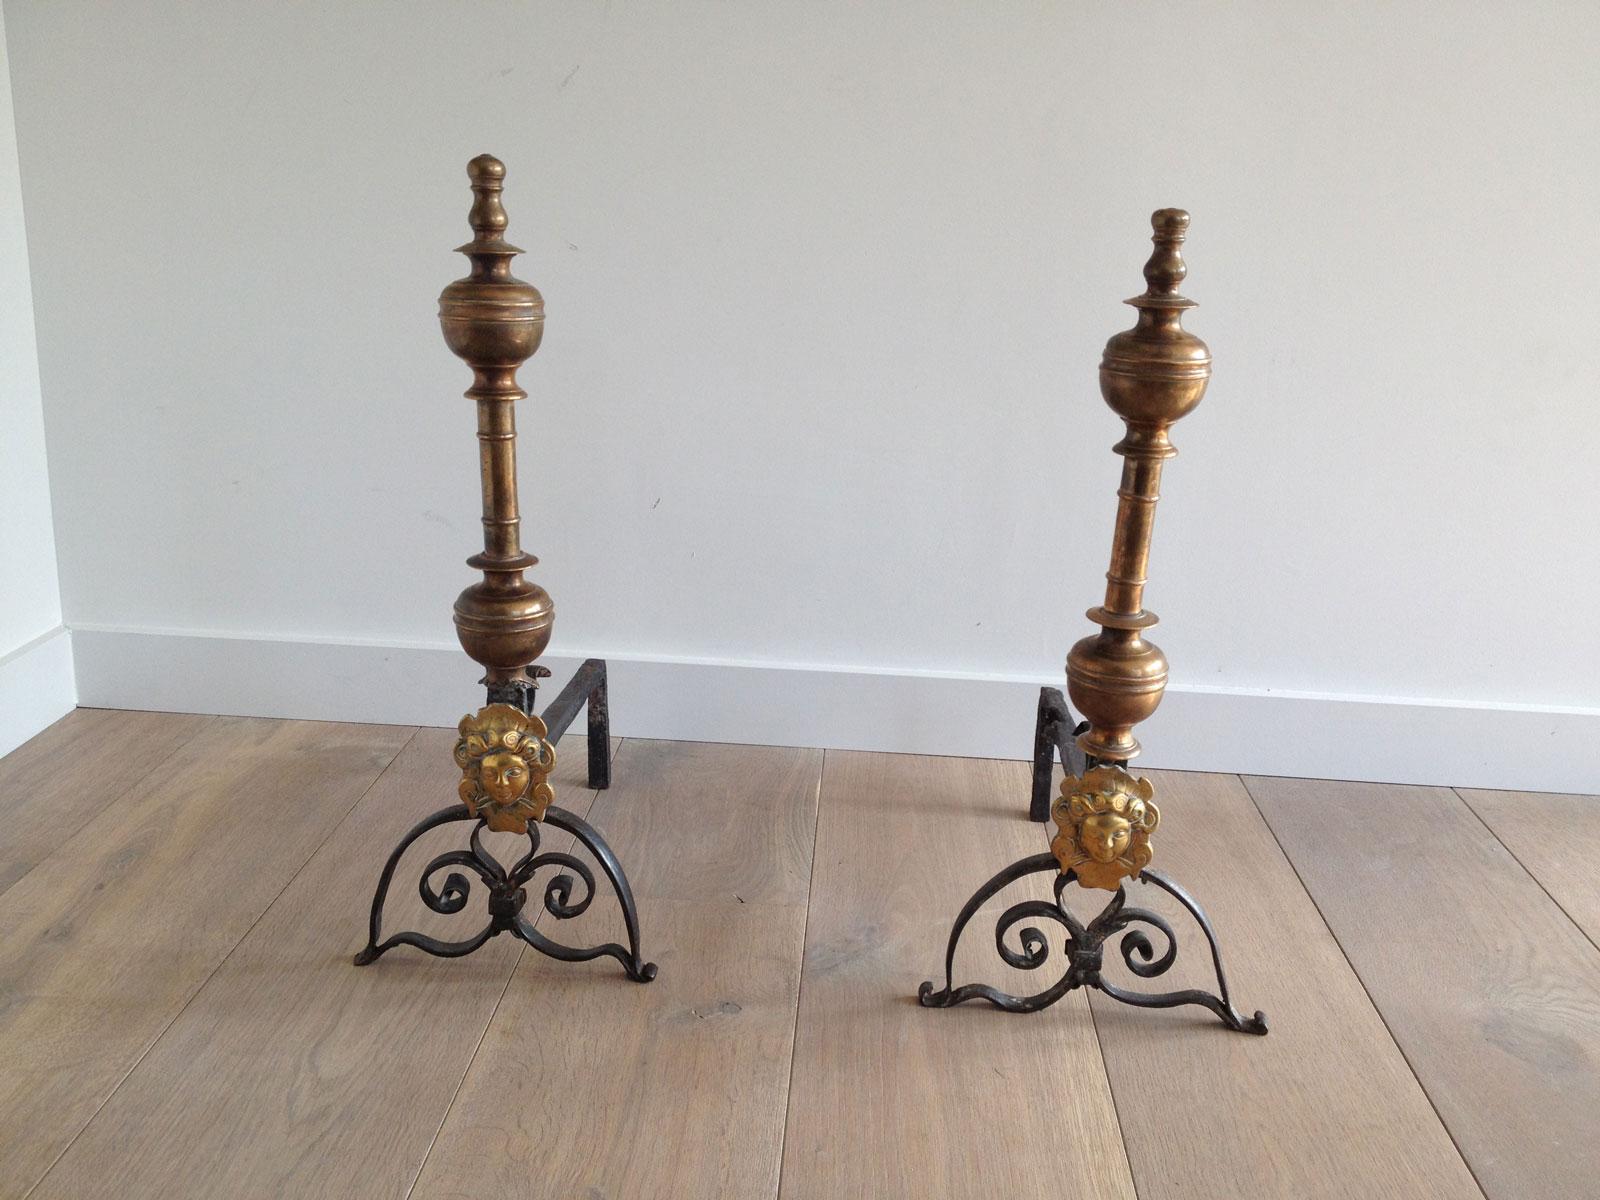 This pair of andirons made of brass and wrought iron shows the 